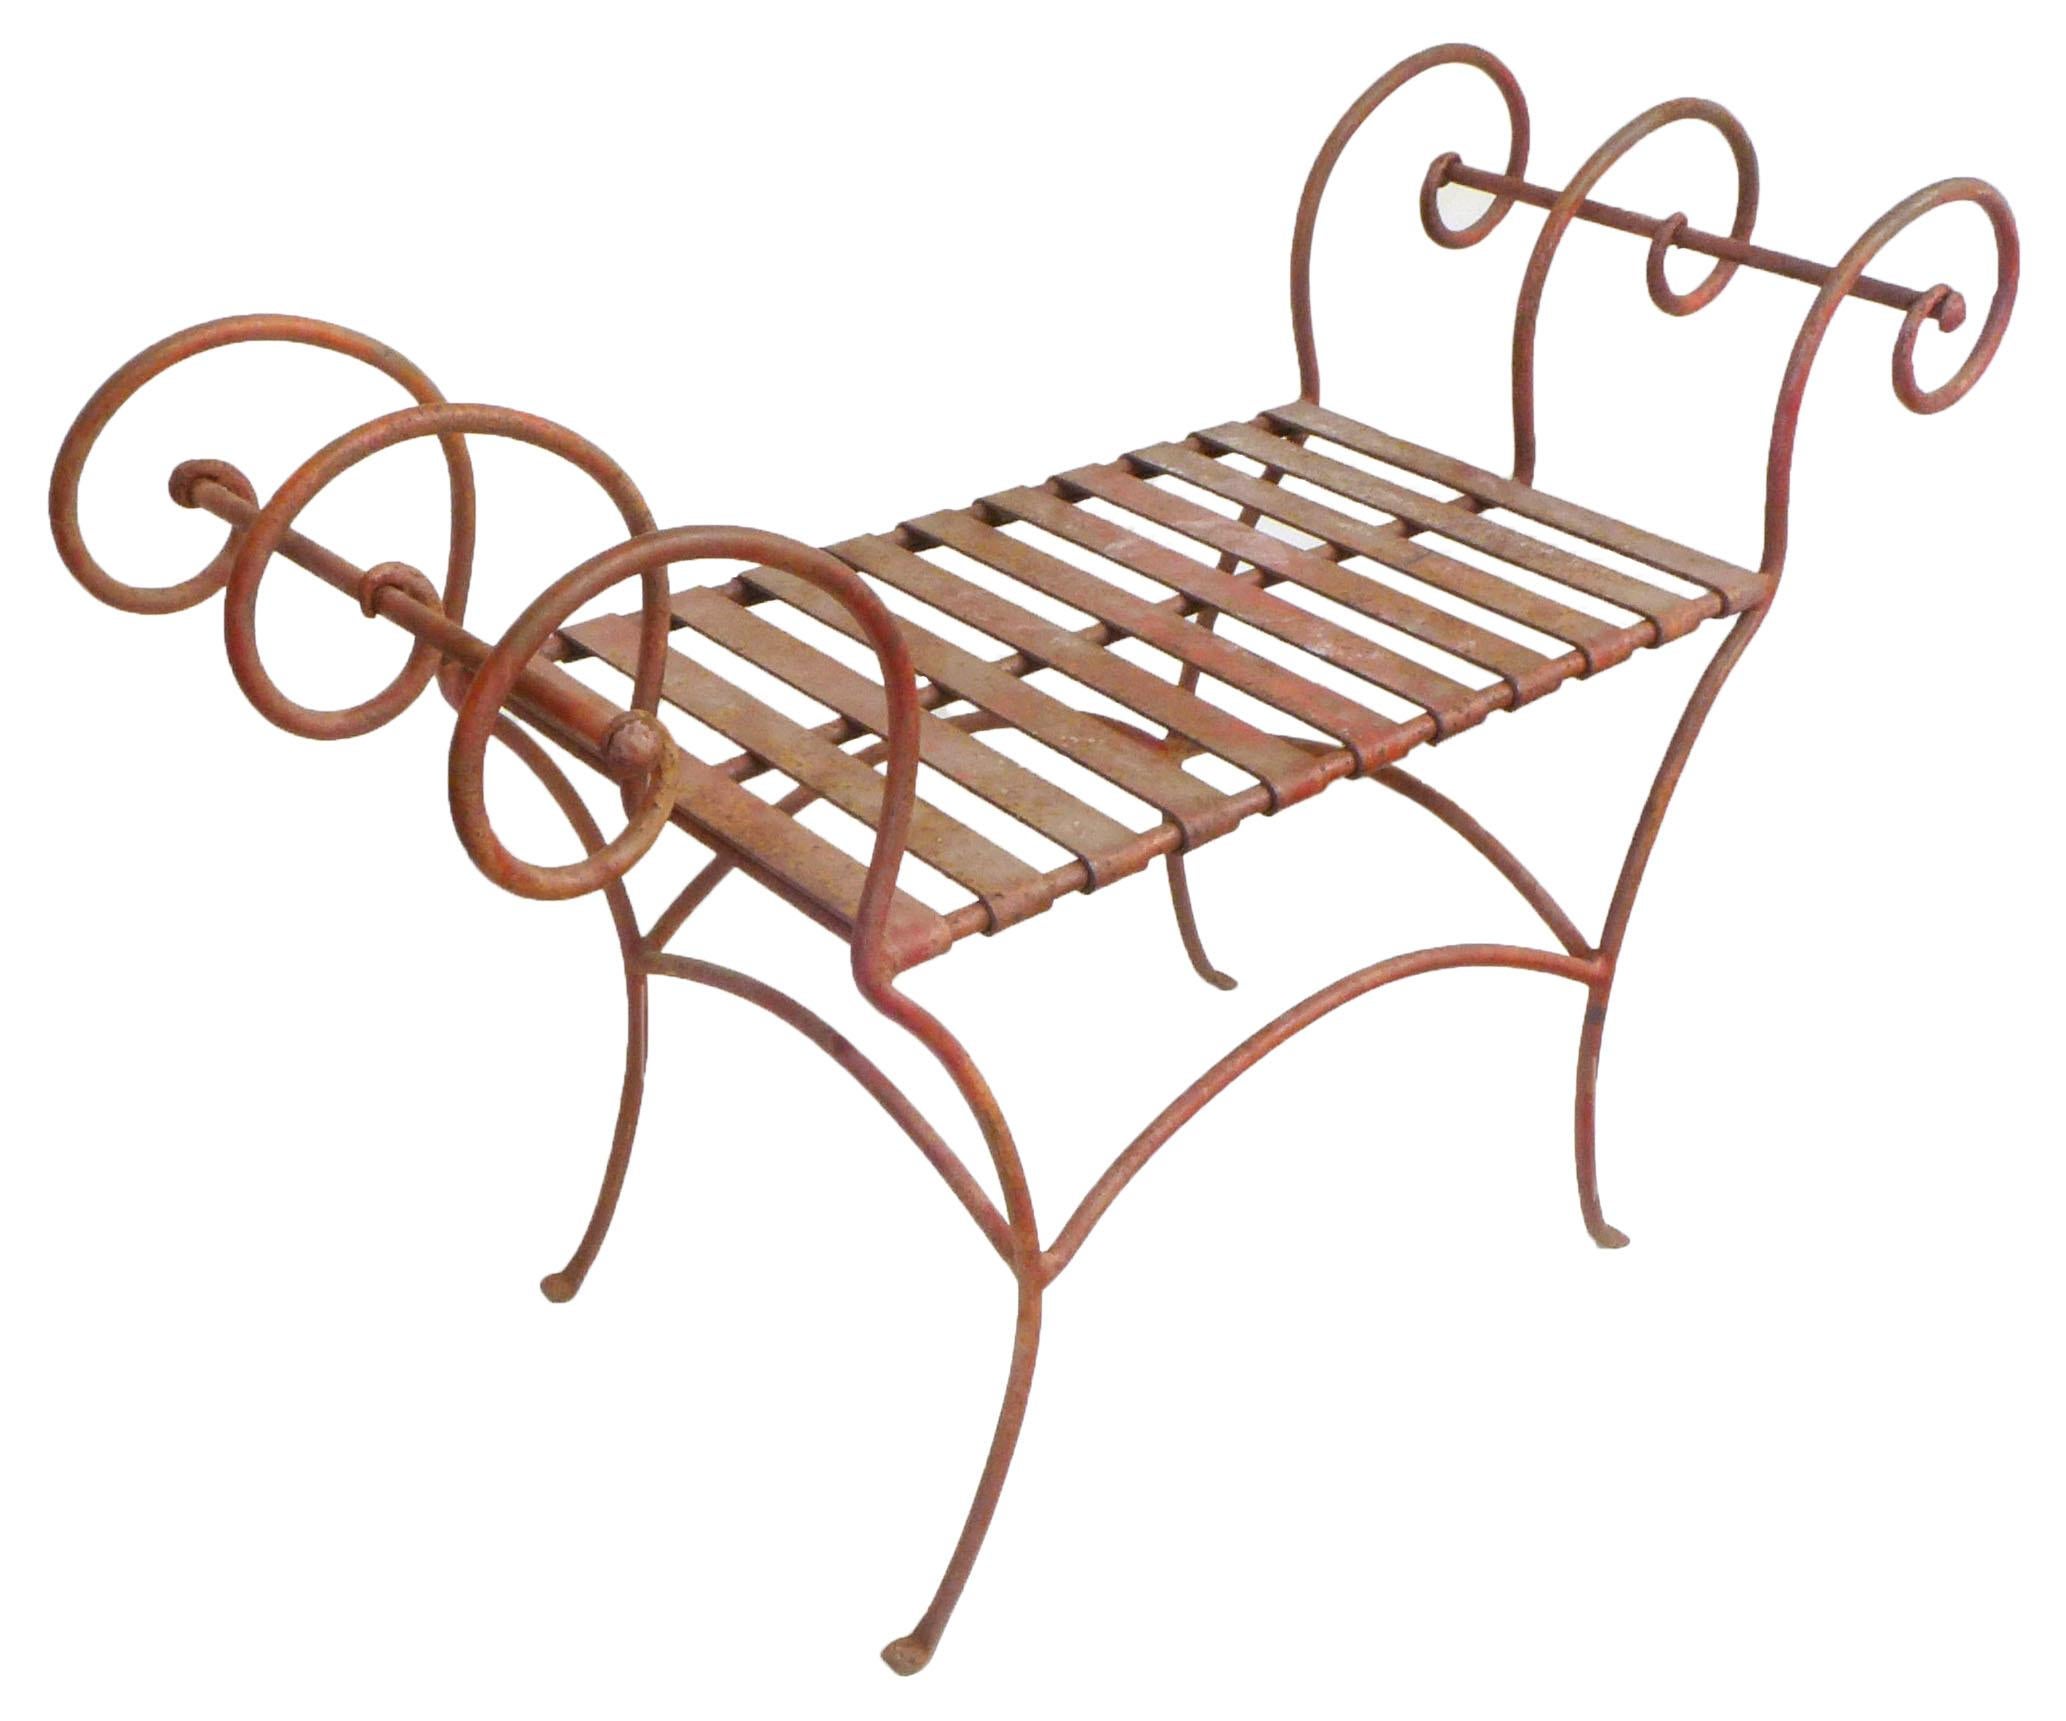 A wonderfully sculptural wrought iron bench, with scrolling armrests and a flat-band seating surface. This elegant seating accent piece retains its original and beautifully patinated red-painted finish. A very decorative, almost Royère-like